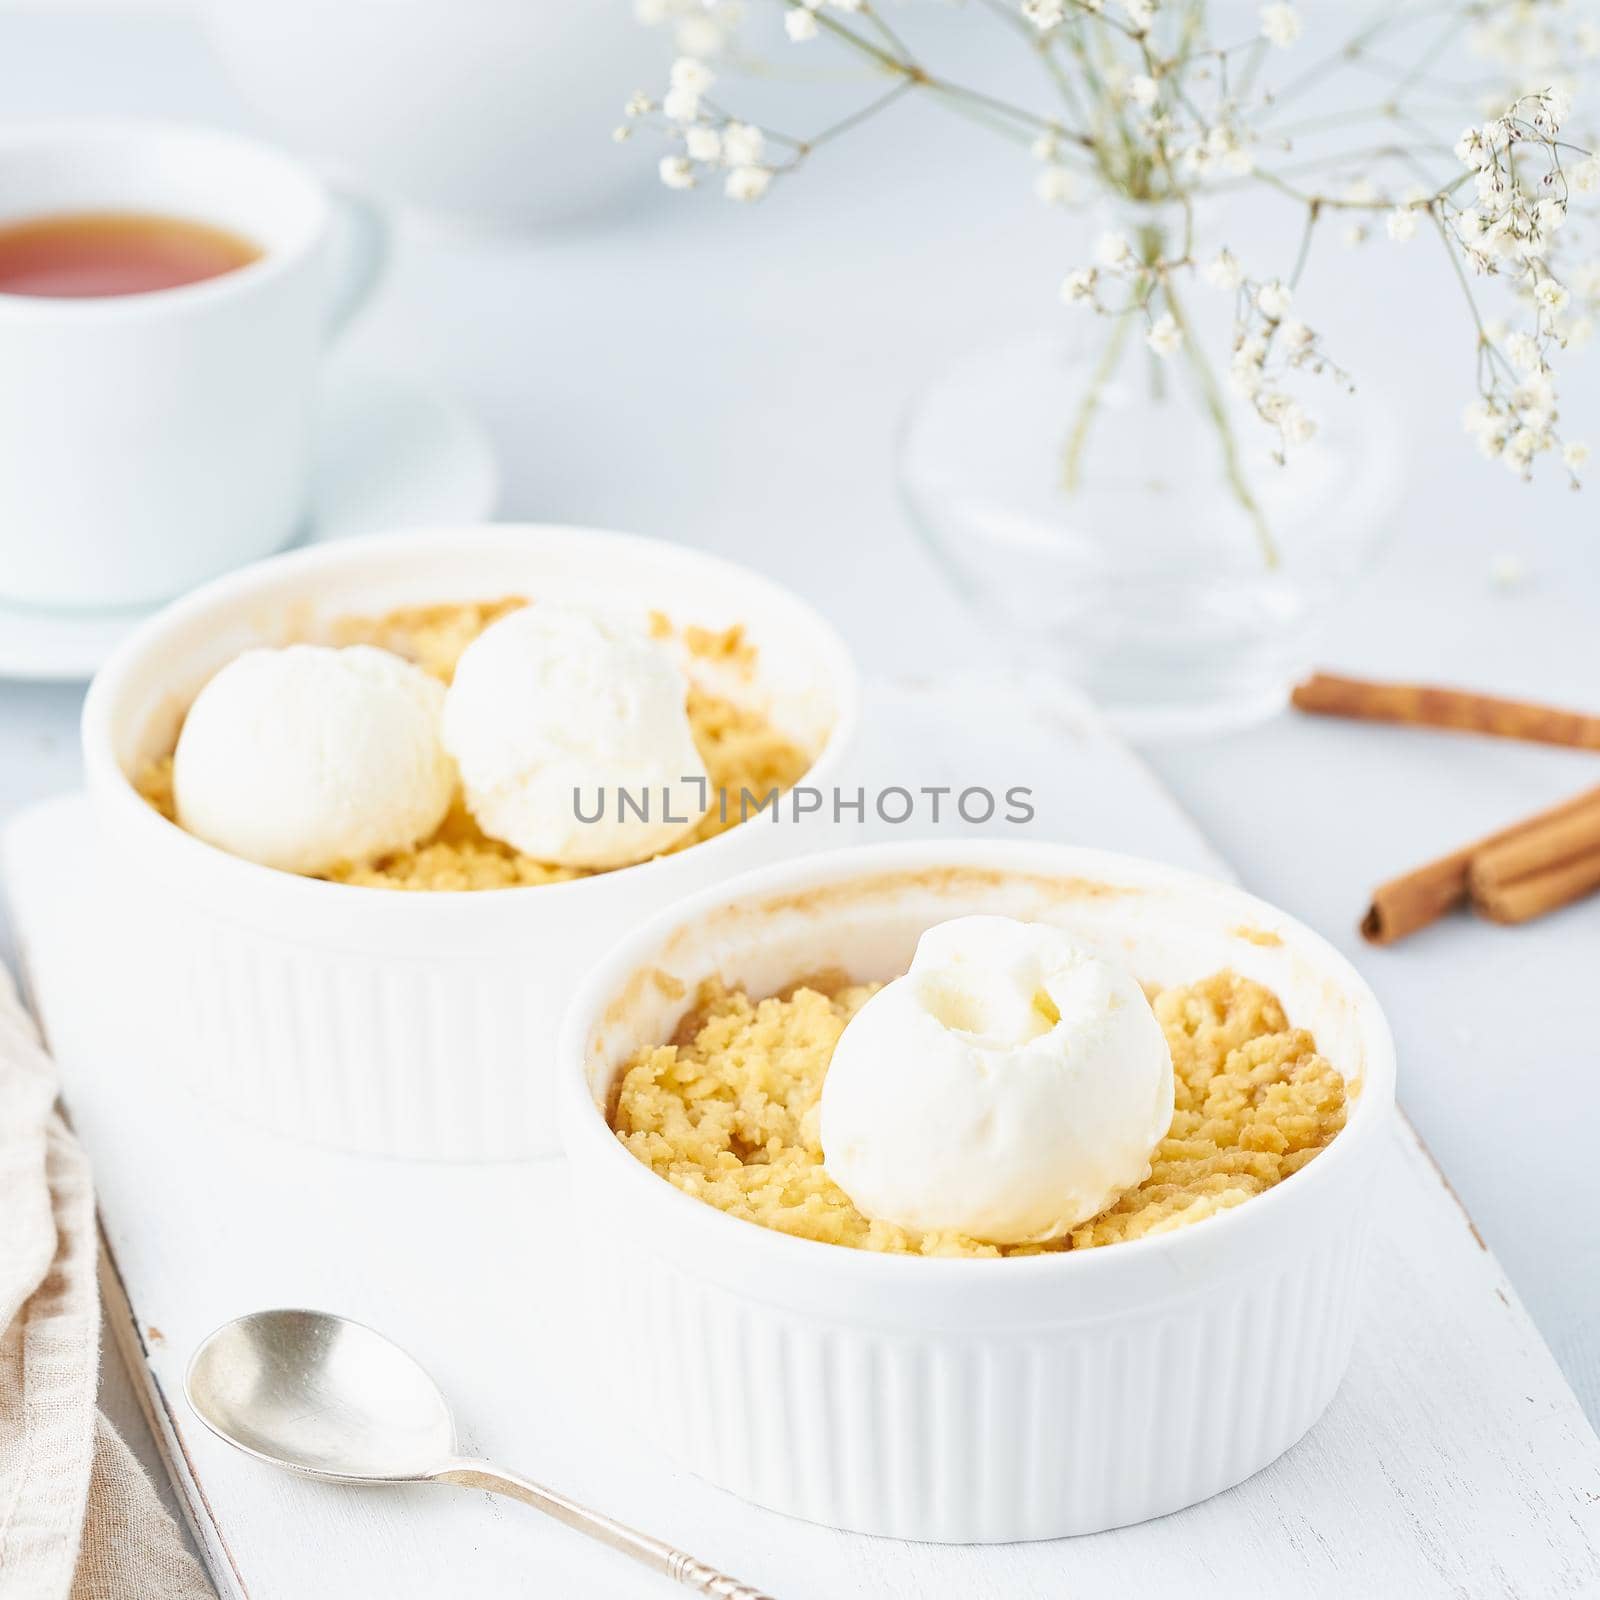 Close up apple crumble with ice cream, spoon with streusel. Side view, vertical. Morning breakfast on light gray table.